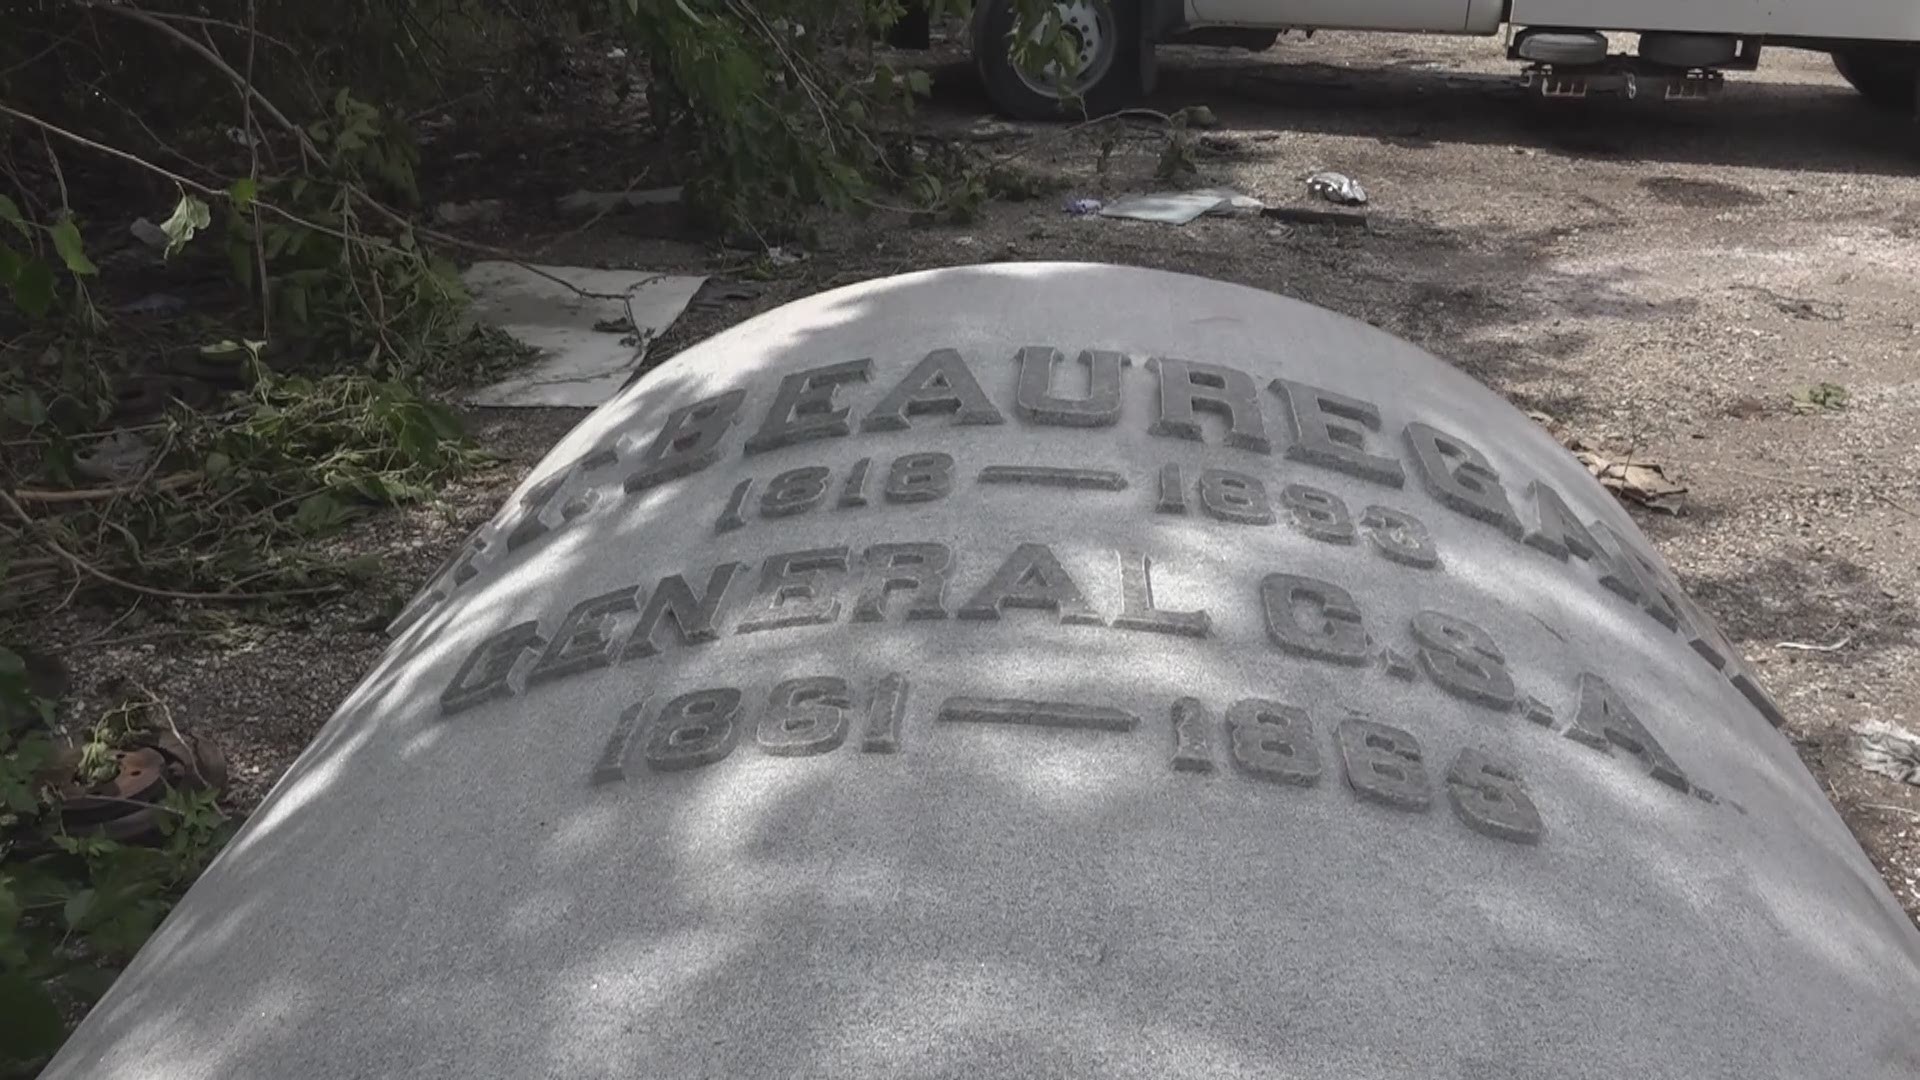 Parts of Confederate monuments have been found in a city owned yard in New Orleans.